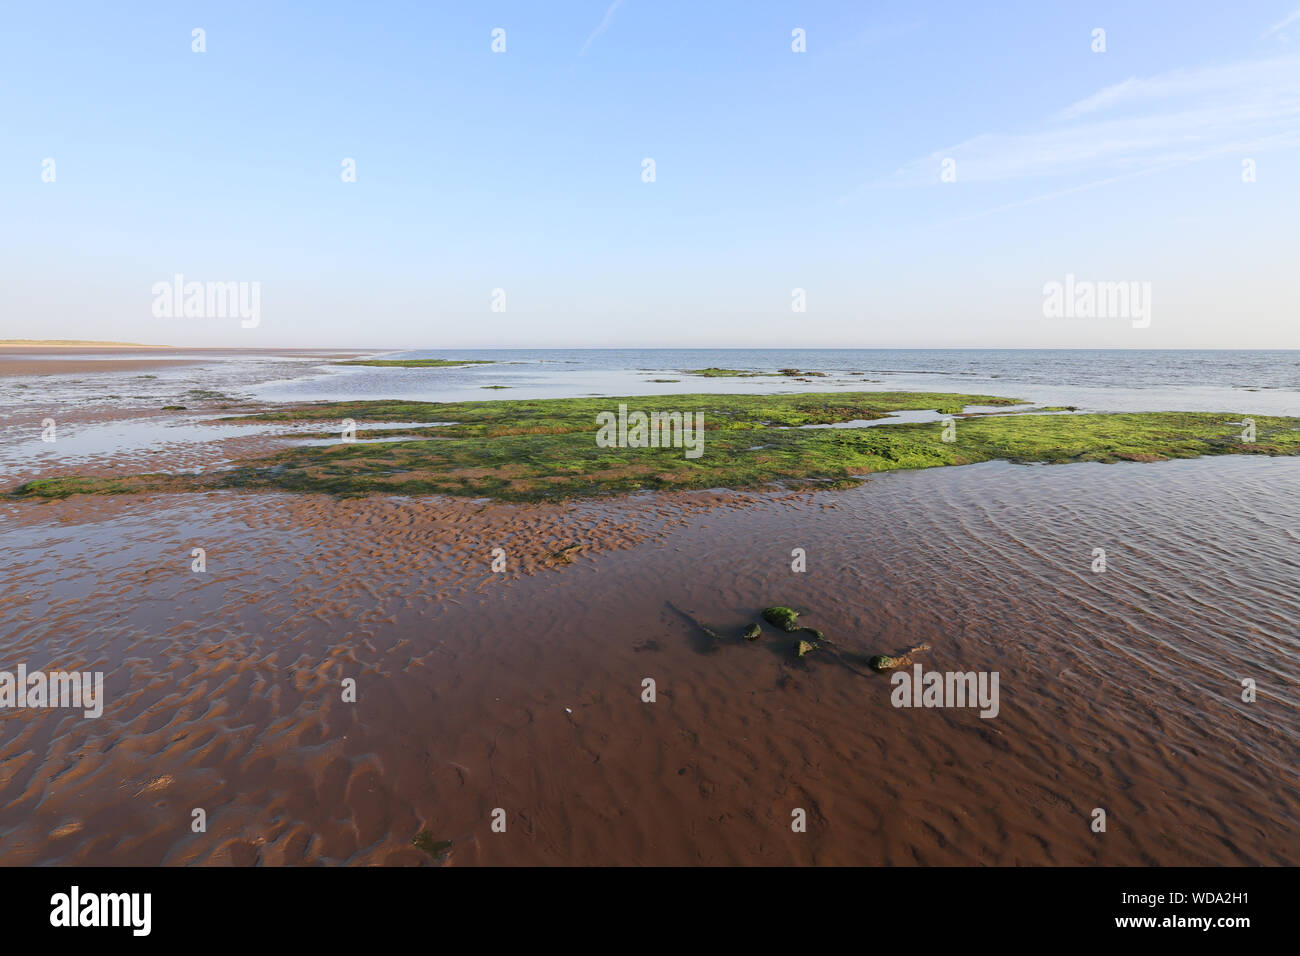 Sunny day at Titchwell Marsh and beach reserve, with blue skies, breenery, and a view of the horizon. Stock Photo